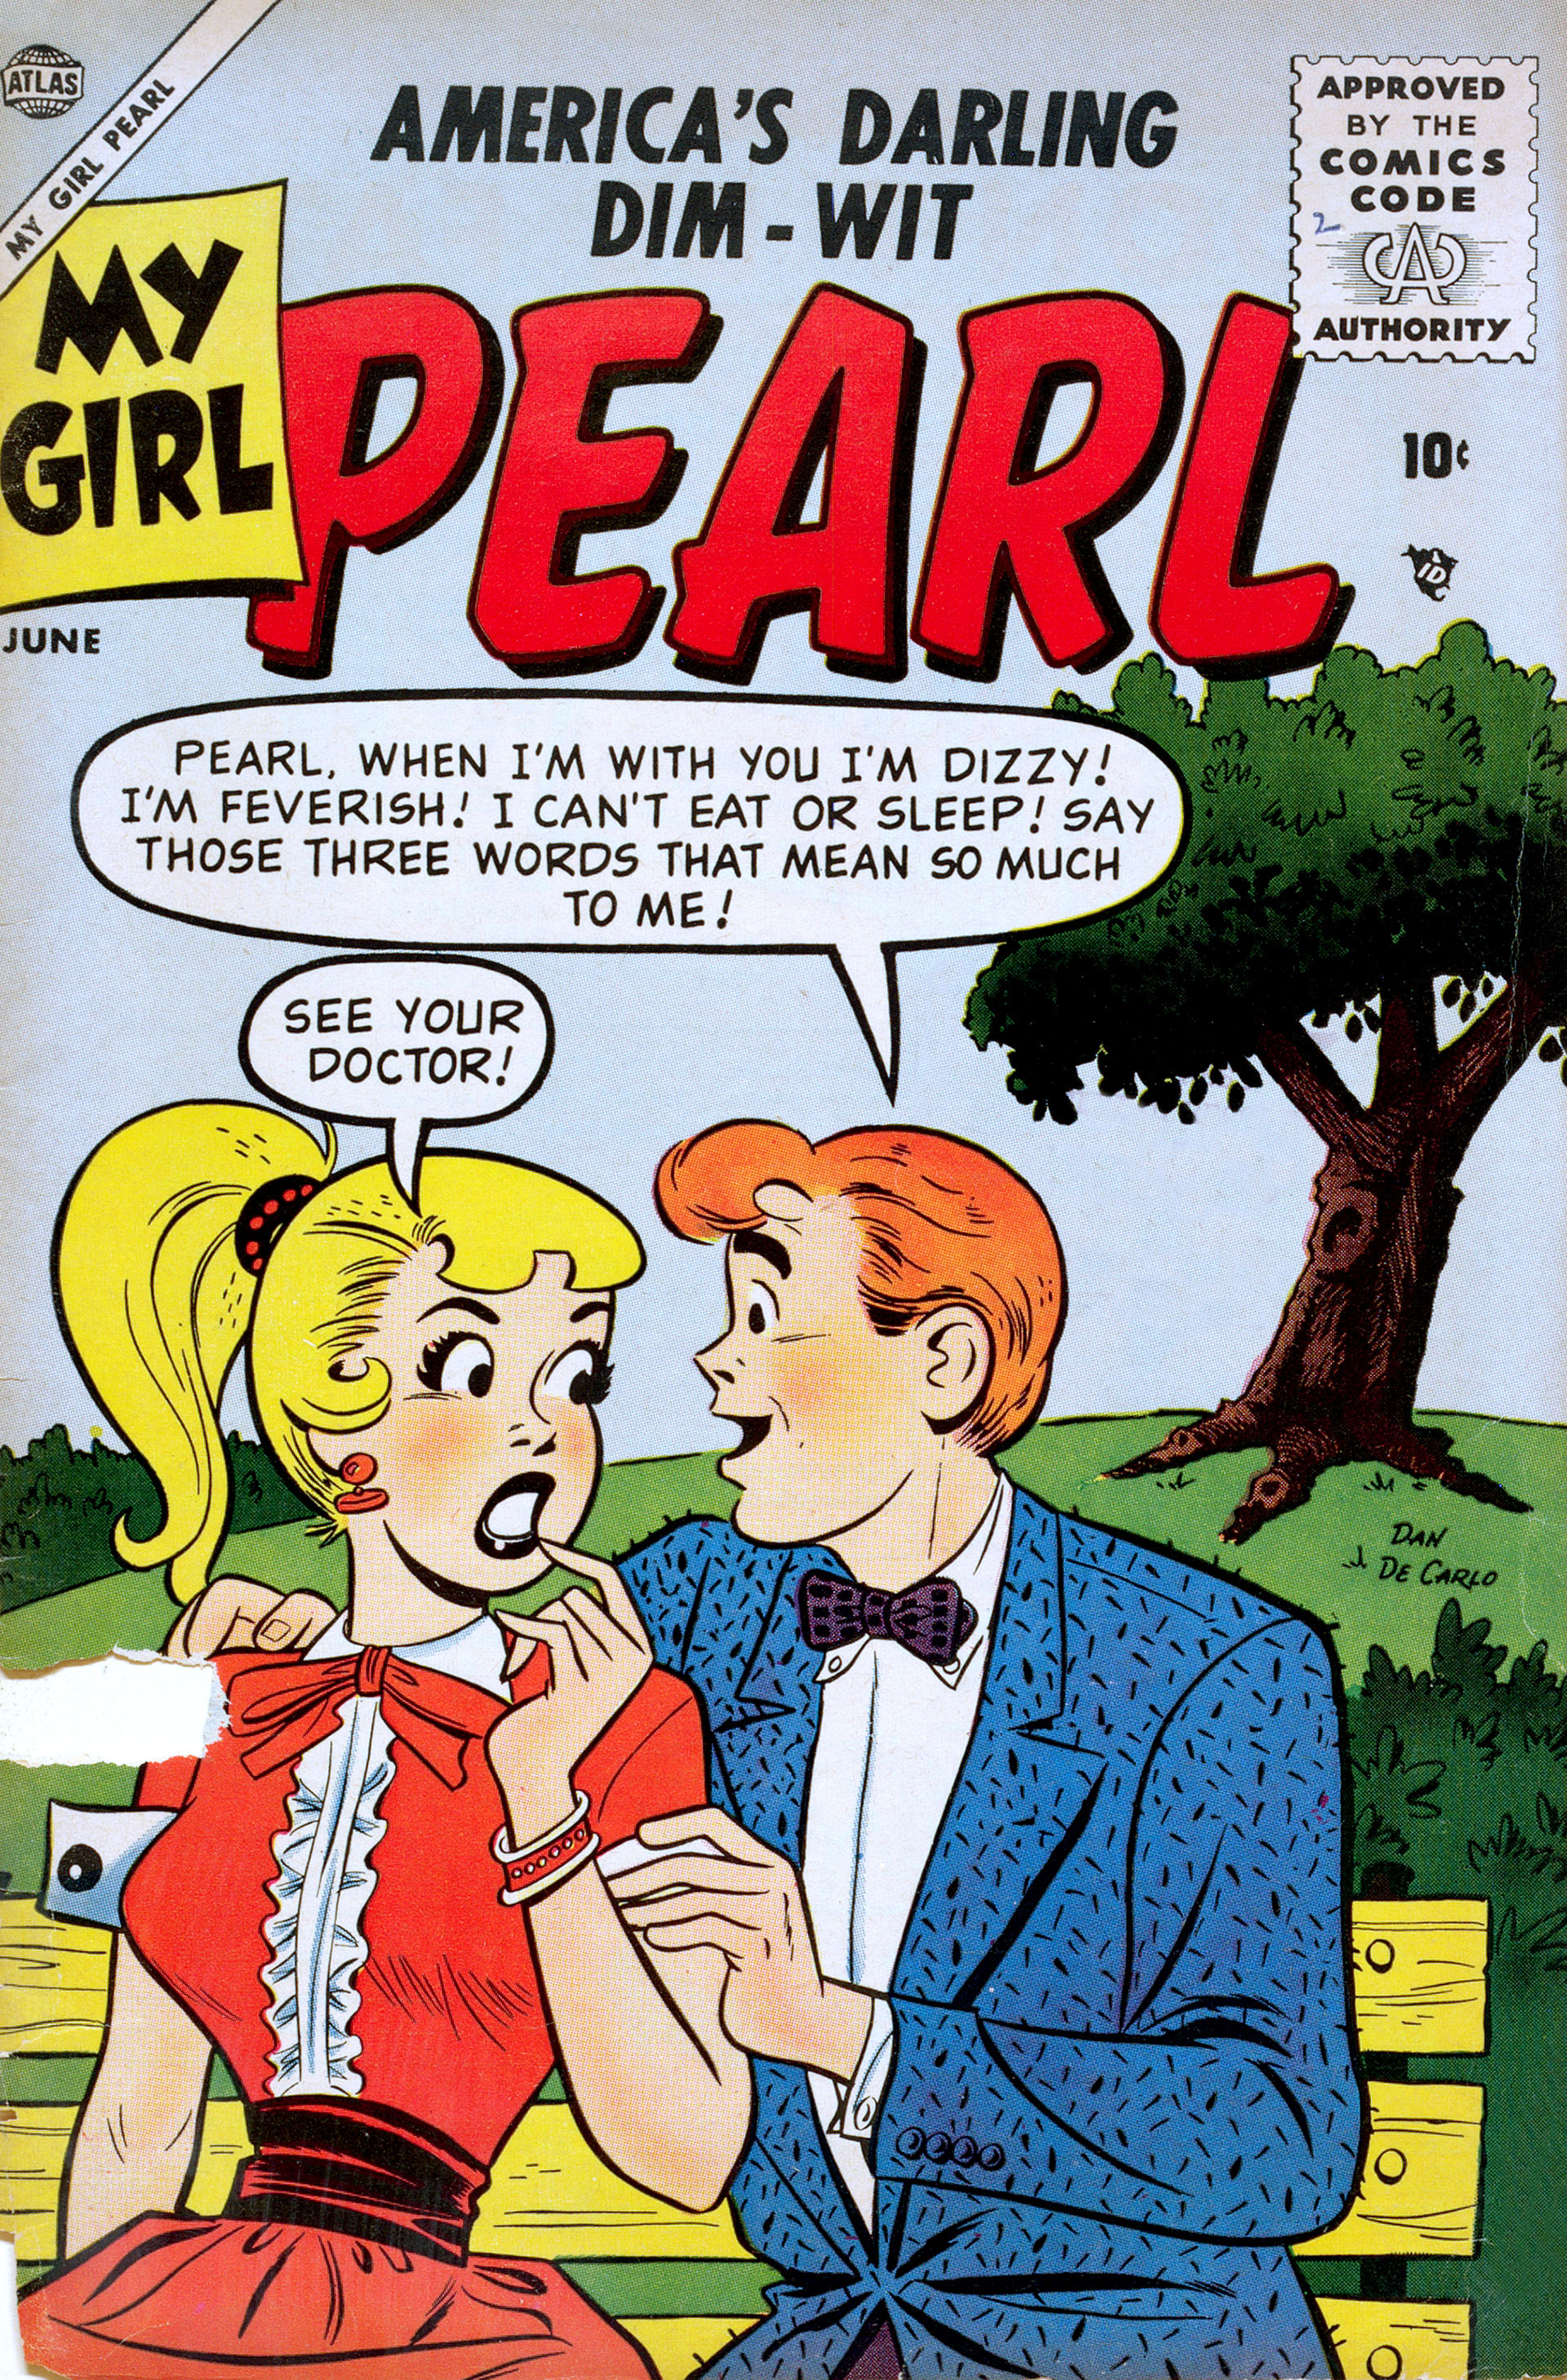 Read online My Girl Pearl comic -  Issue #2 - 1